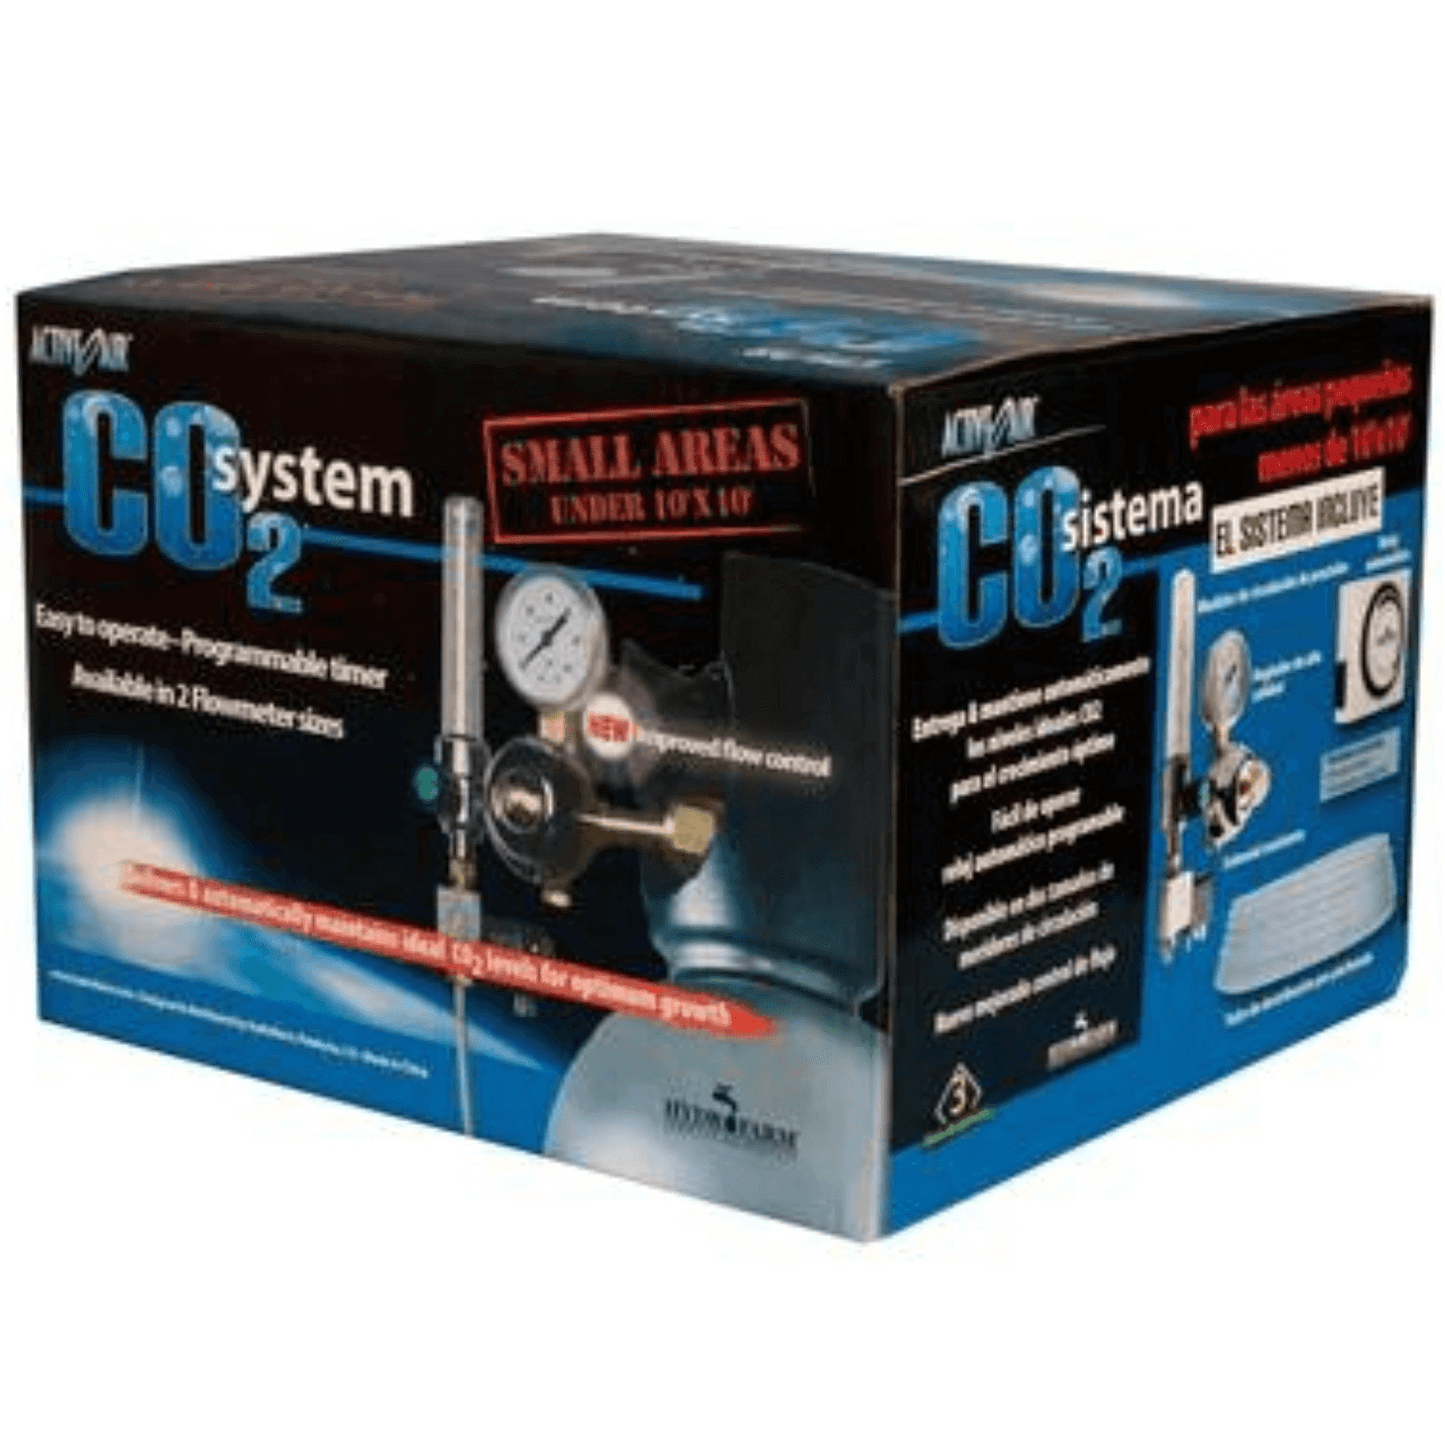 Active Air CO2 System with Timer, 0.2-2 cu ft per hour COSYS Climate Control